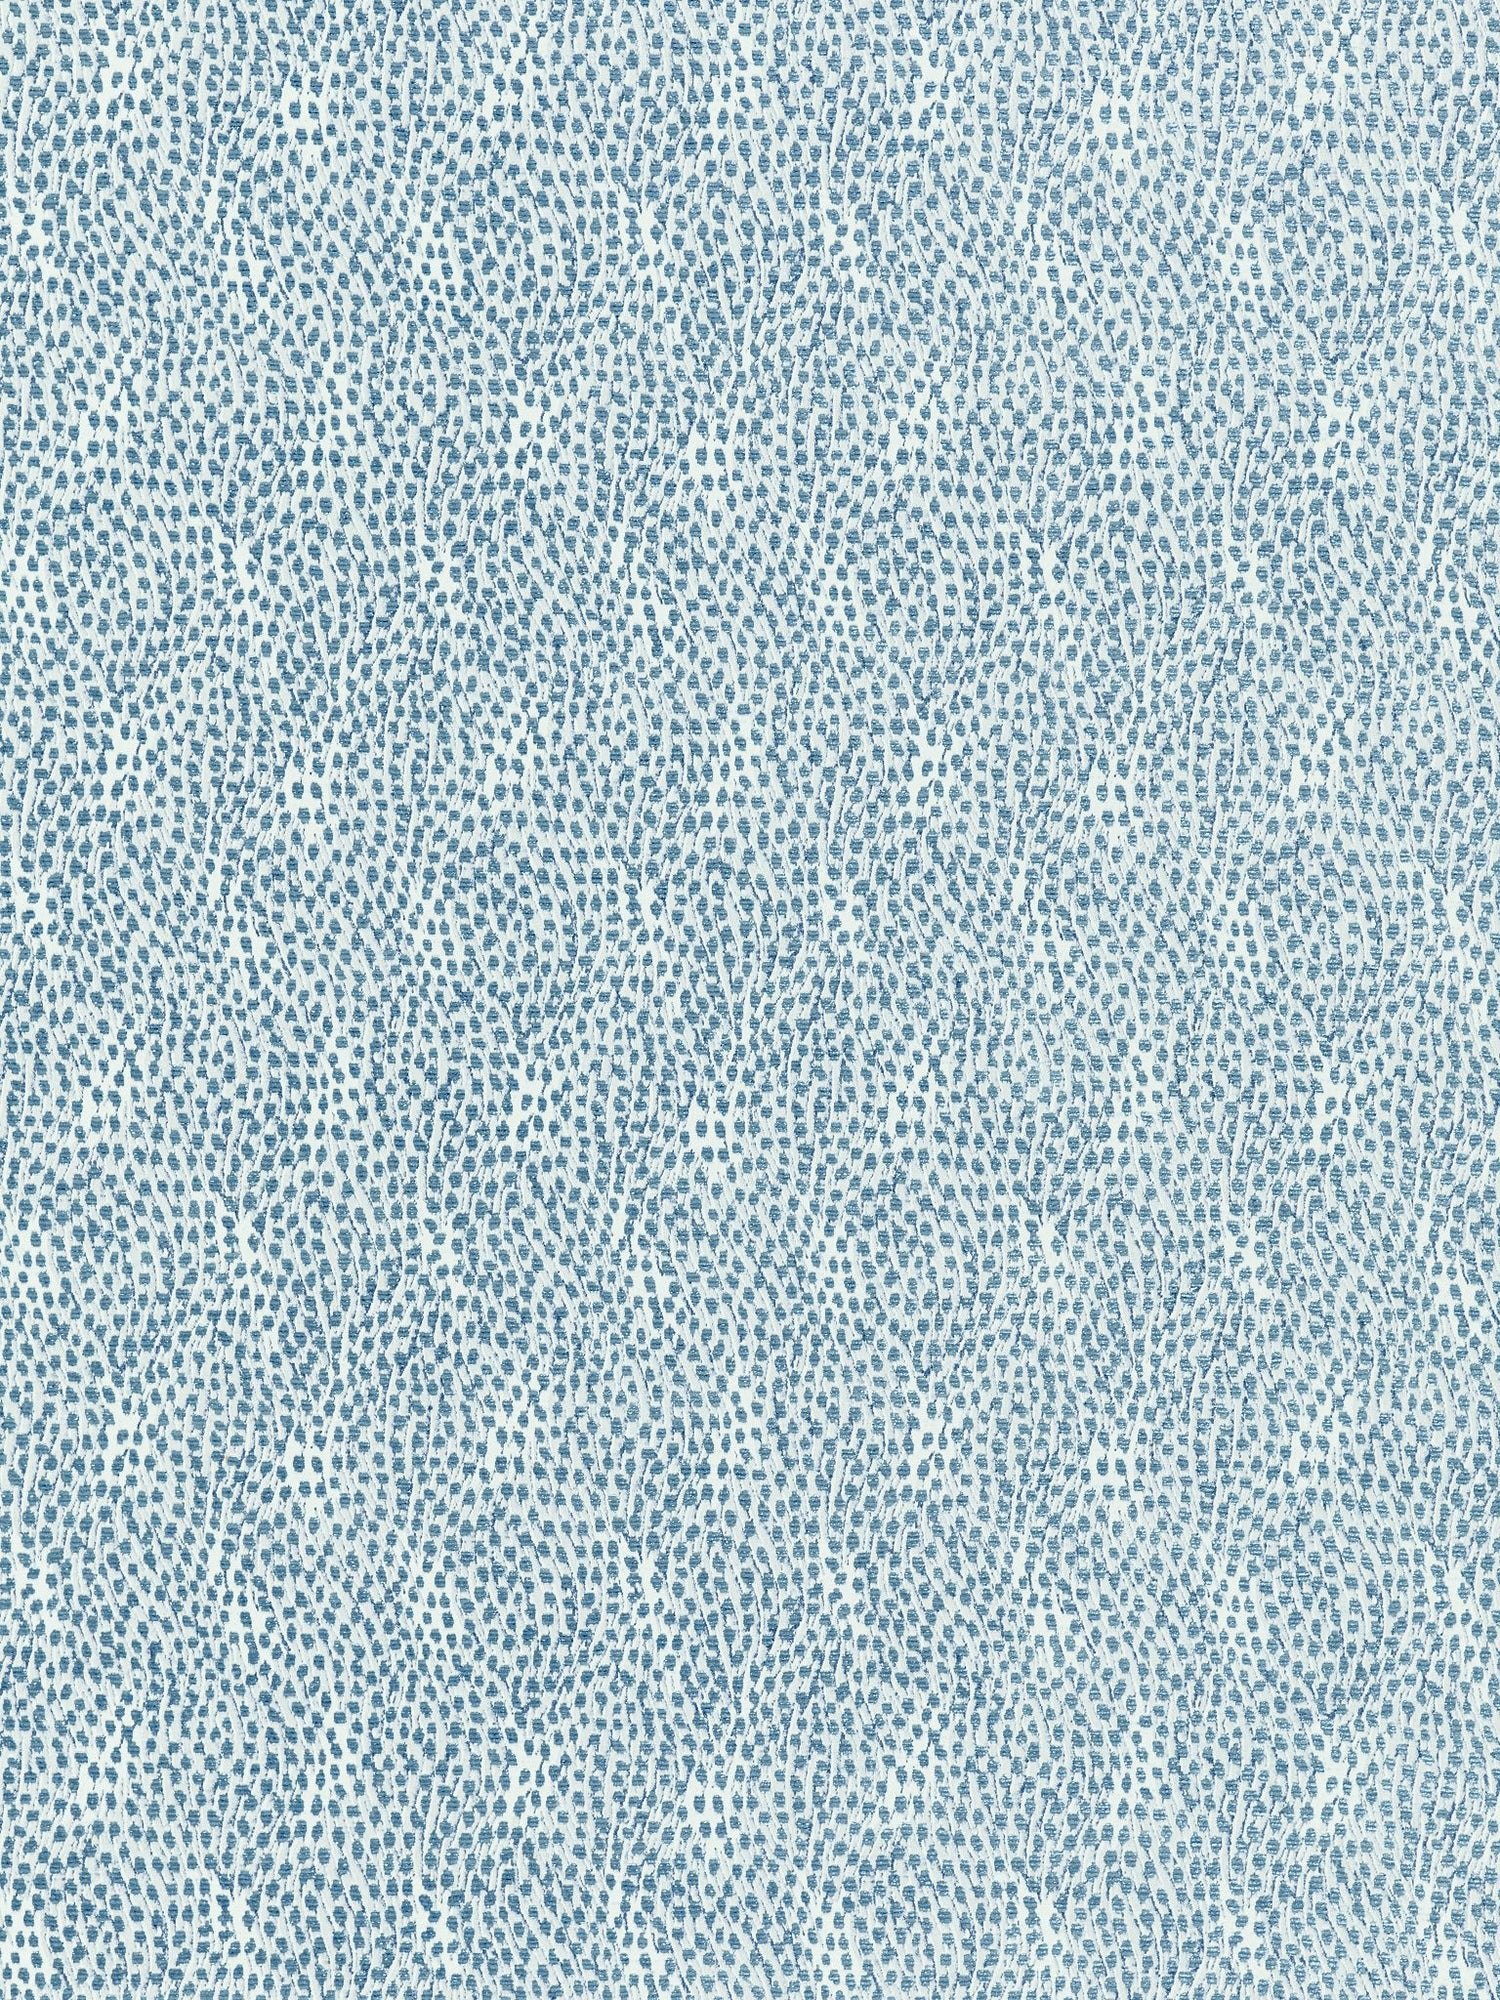 Flurry fabric in ciel color - pattern number BI 00041234 - by Scalamandre in the Old World Weavers collection